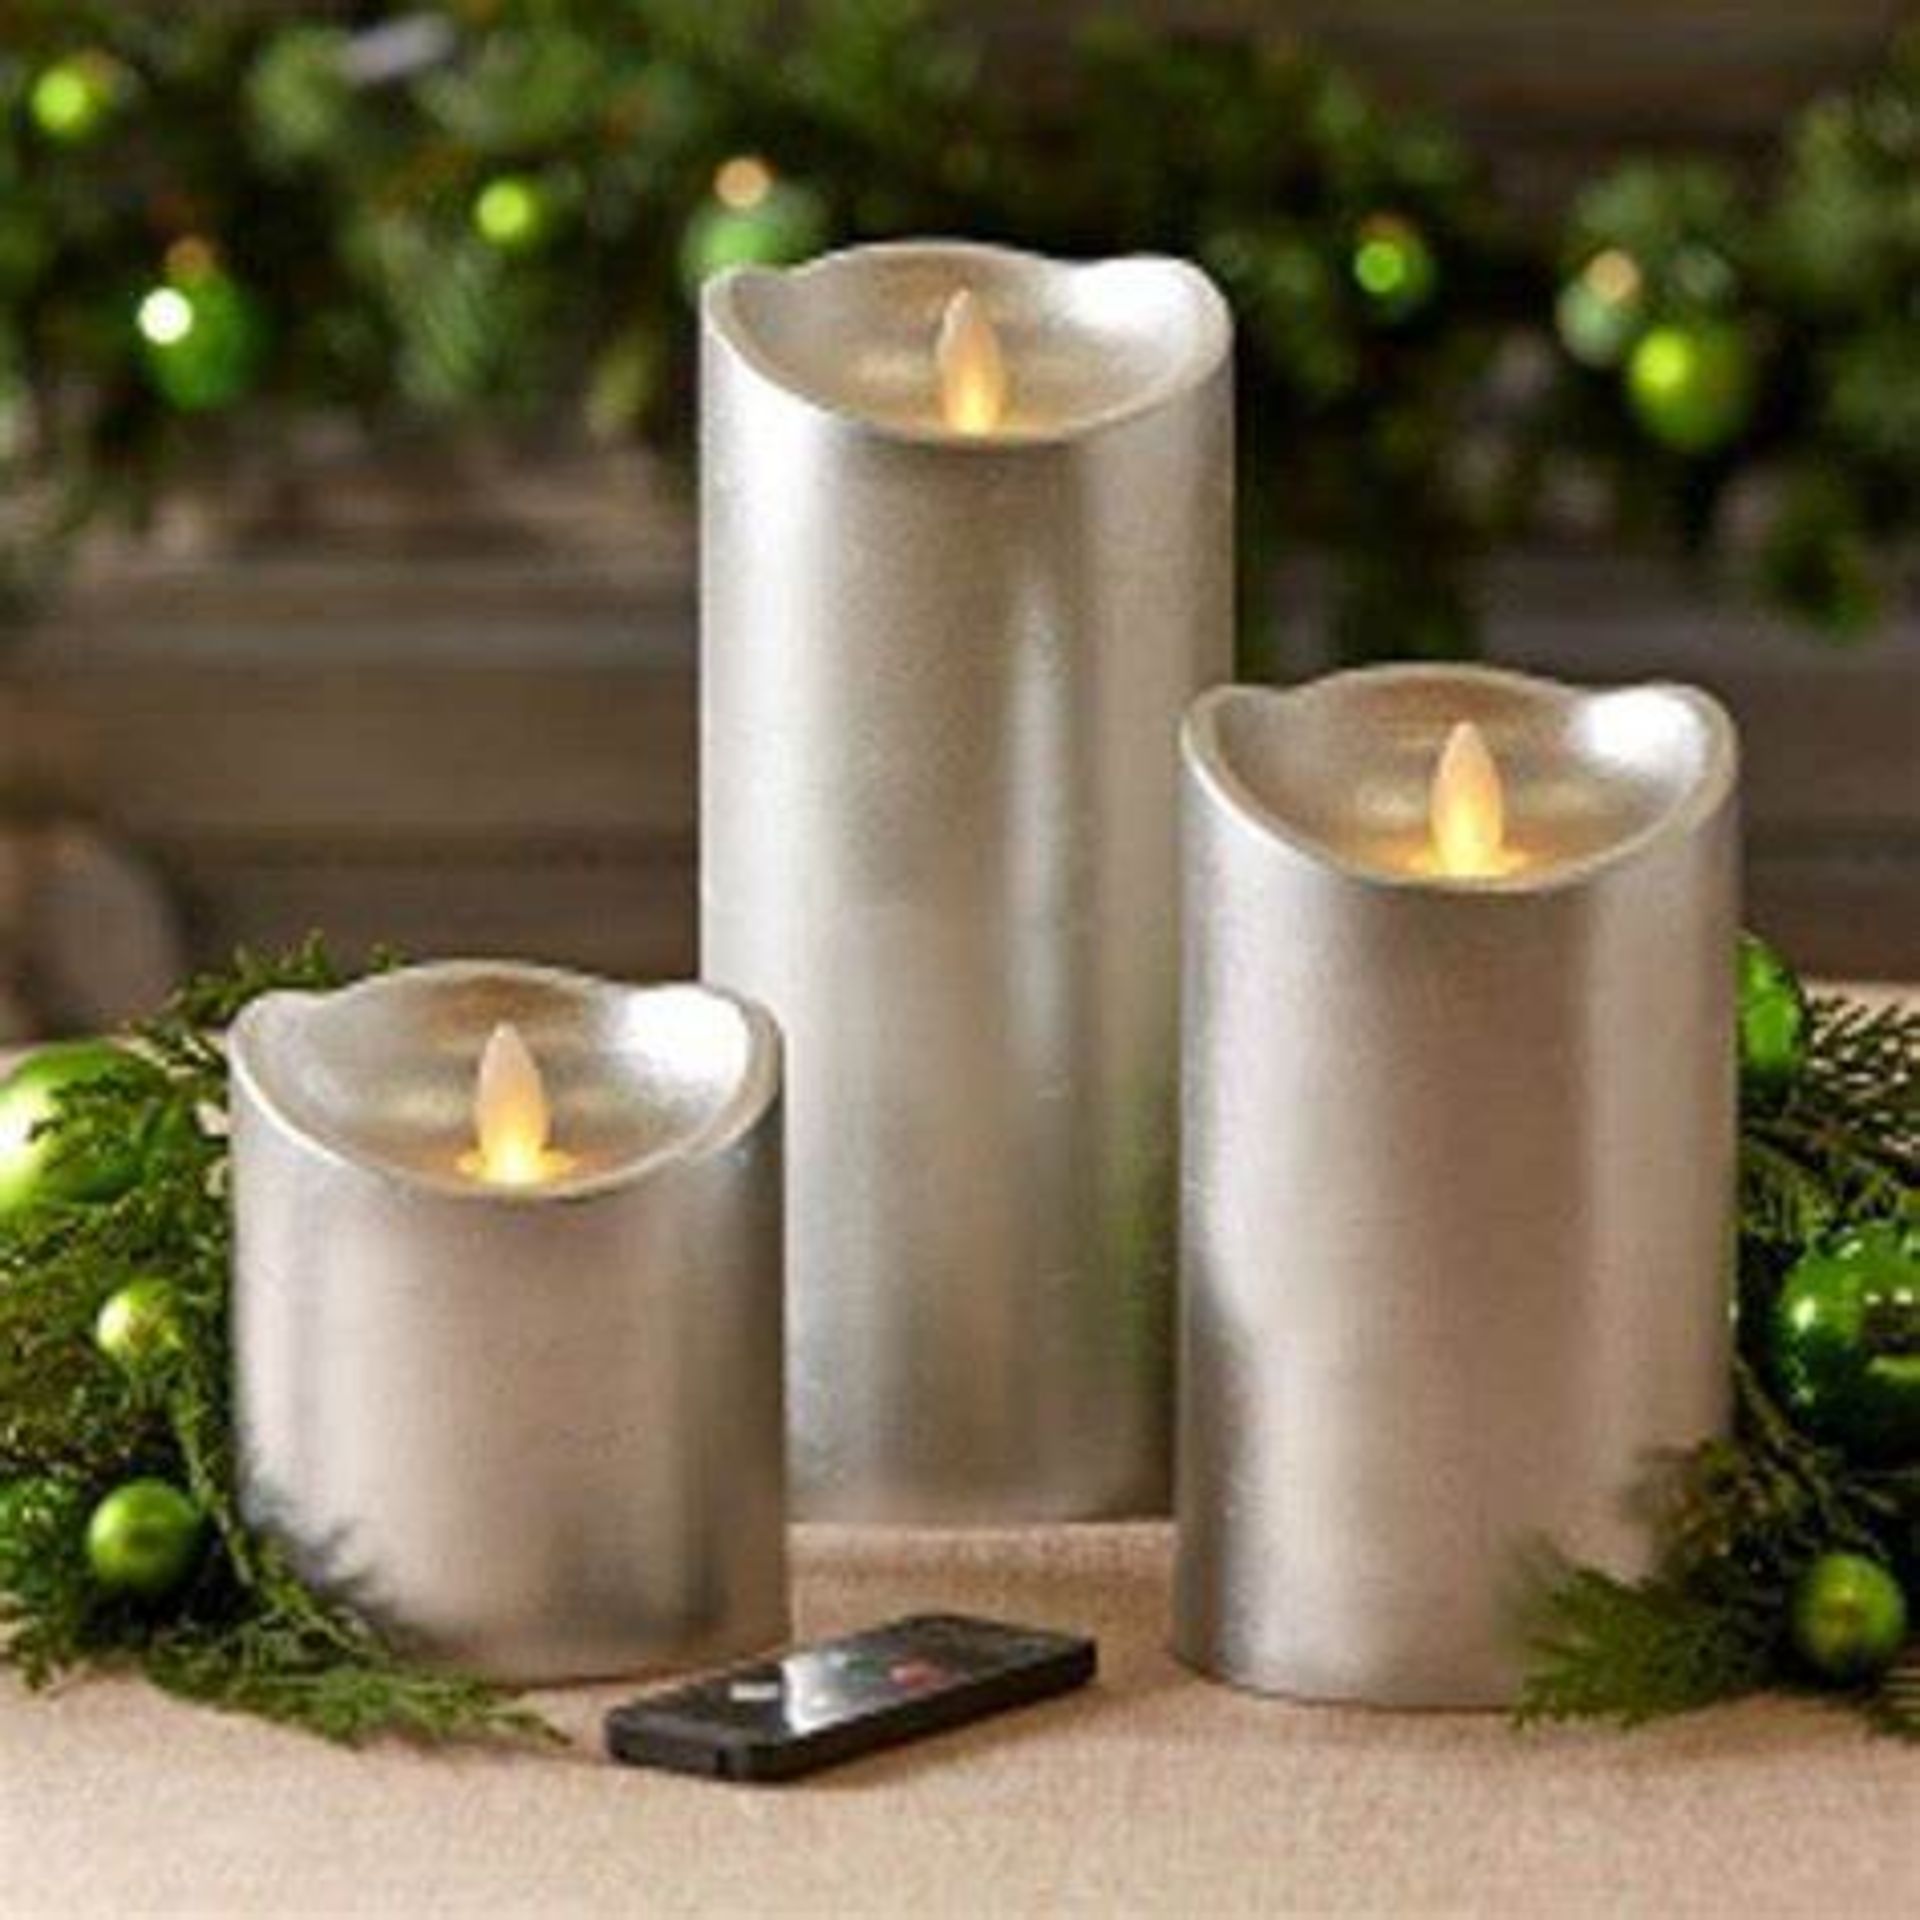 2 x Luxe Collection 3 x 6 Silver Flickering Flame LED Wax Candle This real wax battery operated